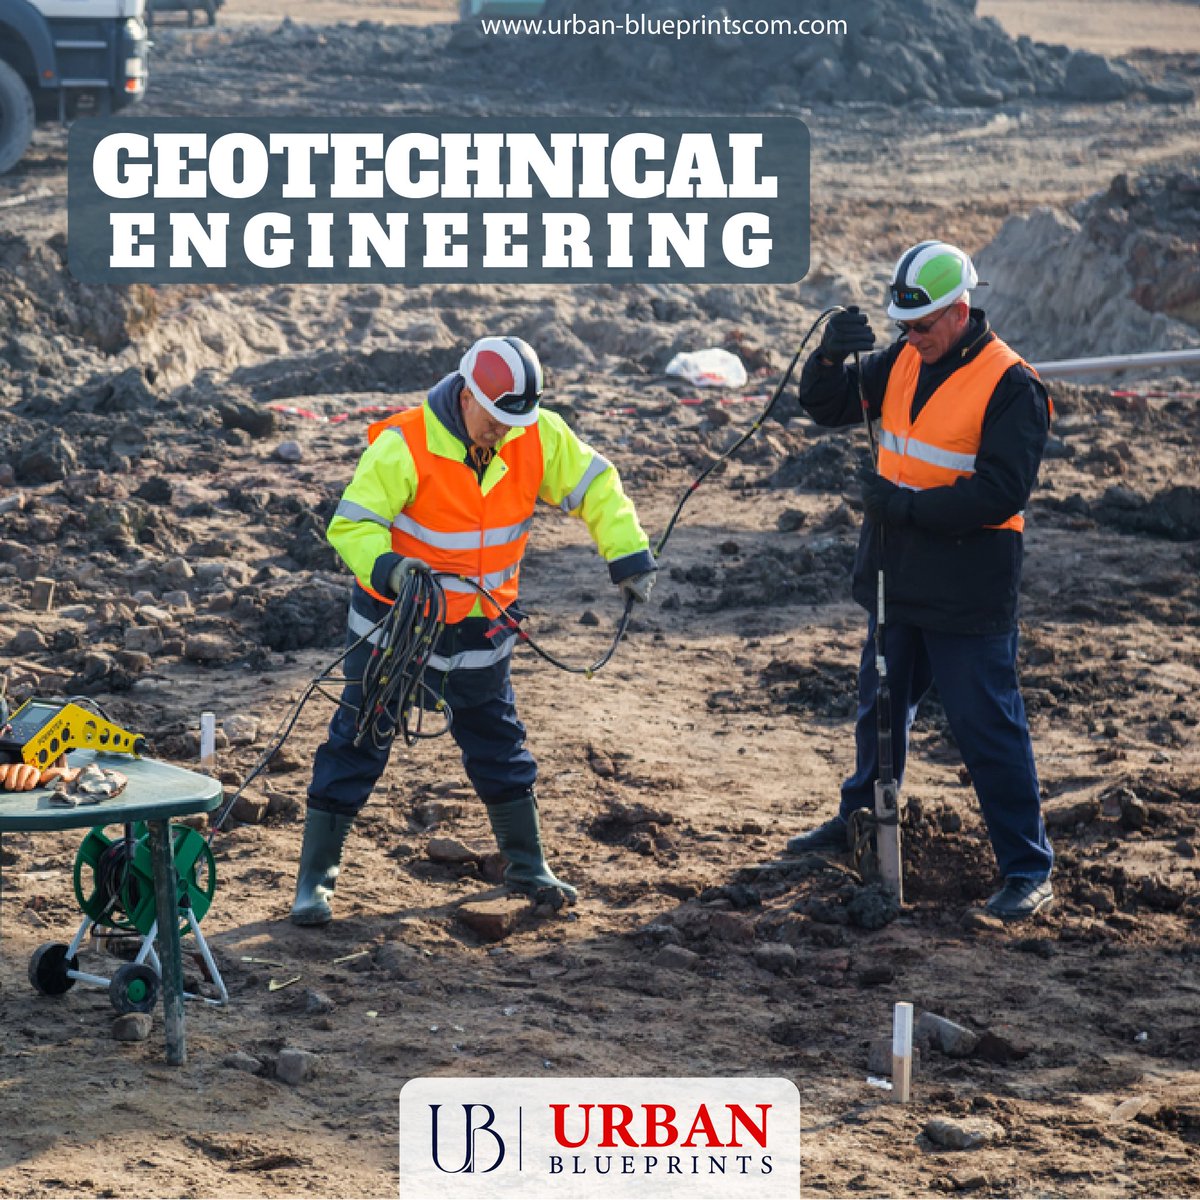 Geotechnical engineering is a branch of civil engineering that focuses on the behavior of Earth materials, such as soil, rock, and groundwater, and their interaction with structures and infrastructure.
.
.
#urbanblueprints #geotechnicalengineer #geotechnical